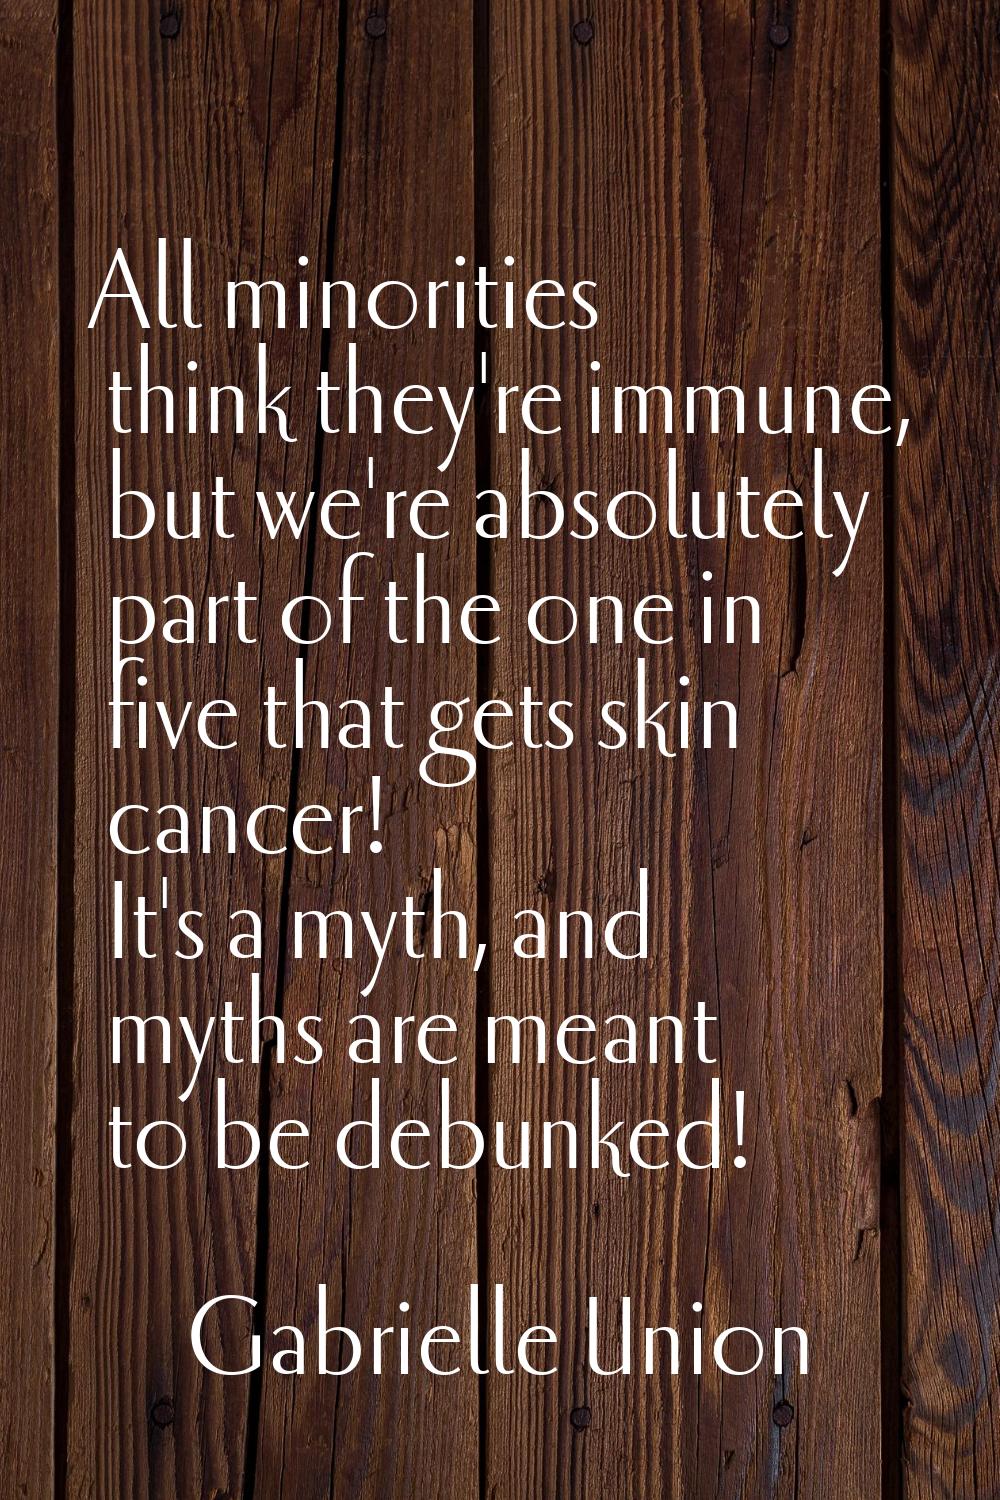 All minorities think they're immune, but we're absolutely part of the one in five that gets skin ca